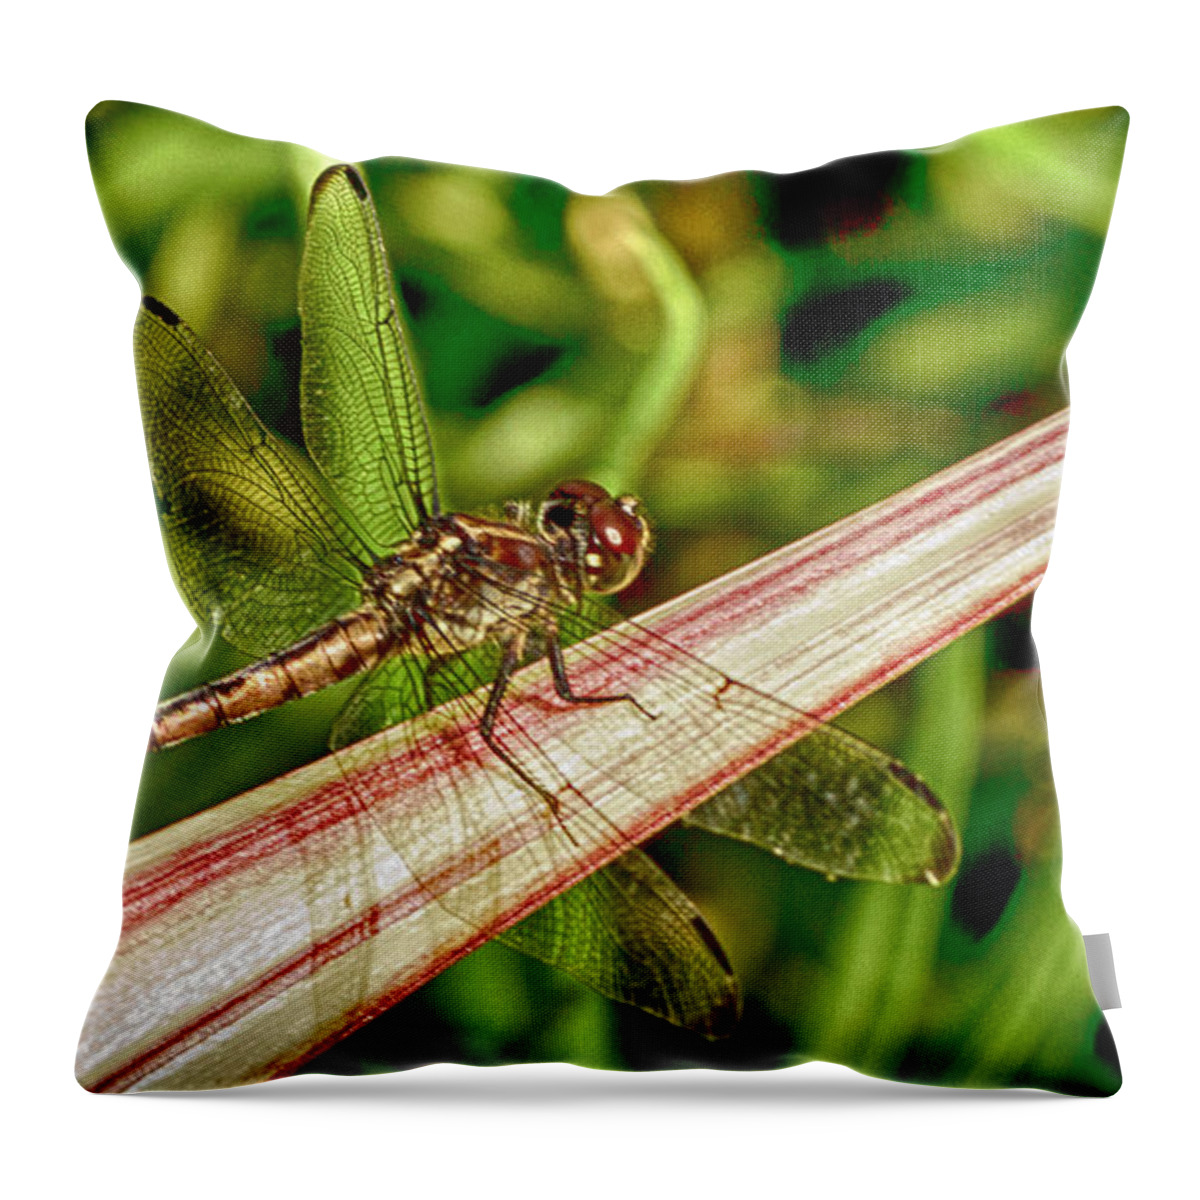 Dragonfly Throw Pillow featuring the photograph Winged Dragon by Bill Barber